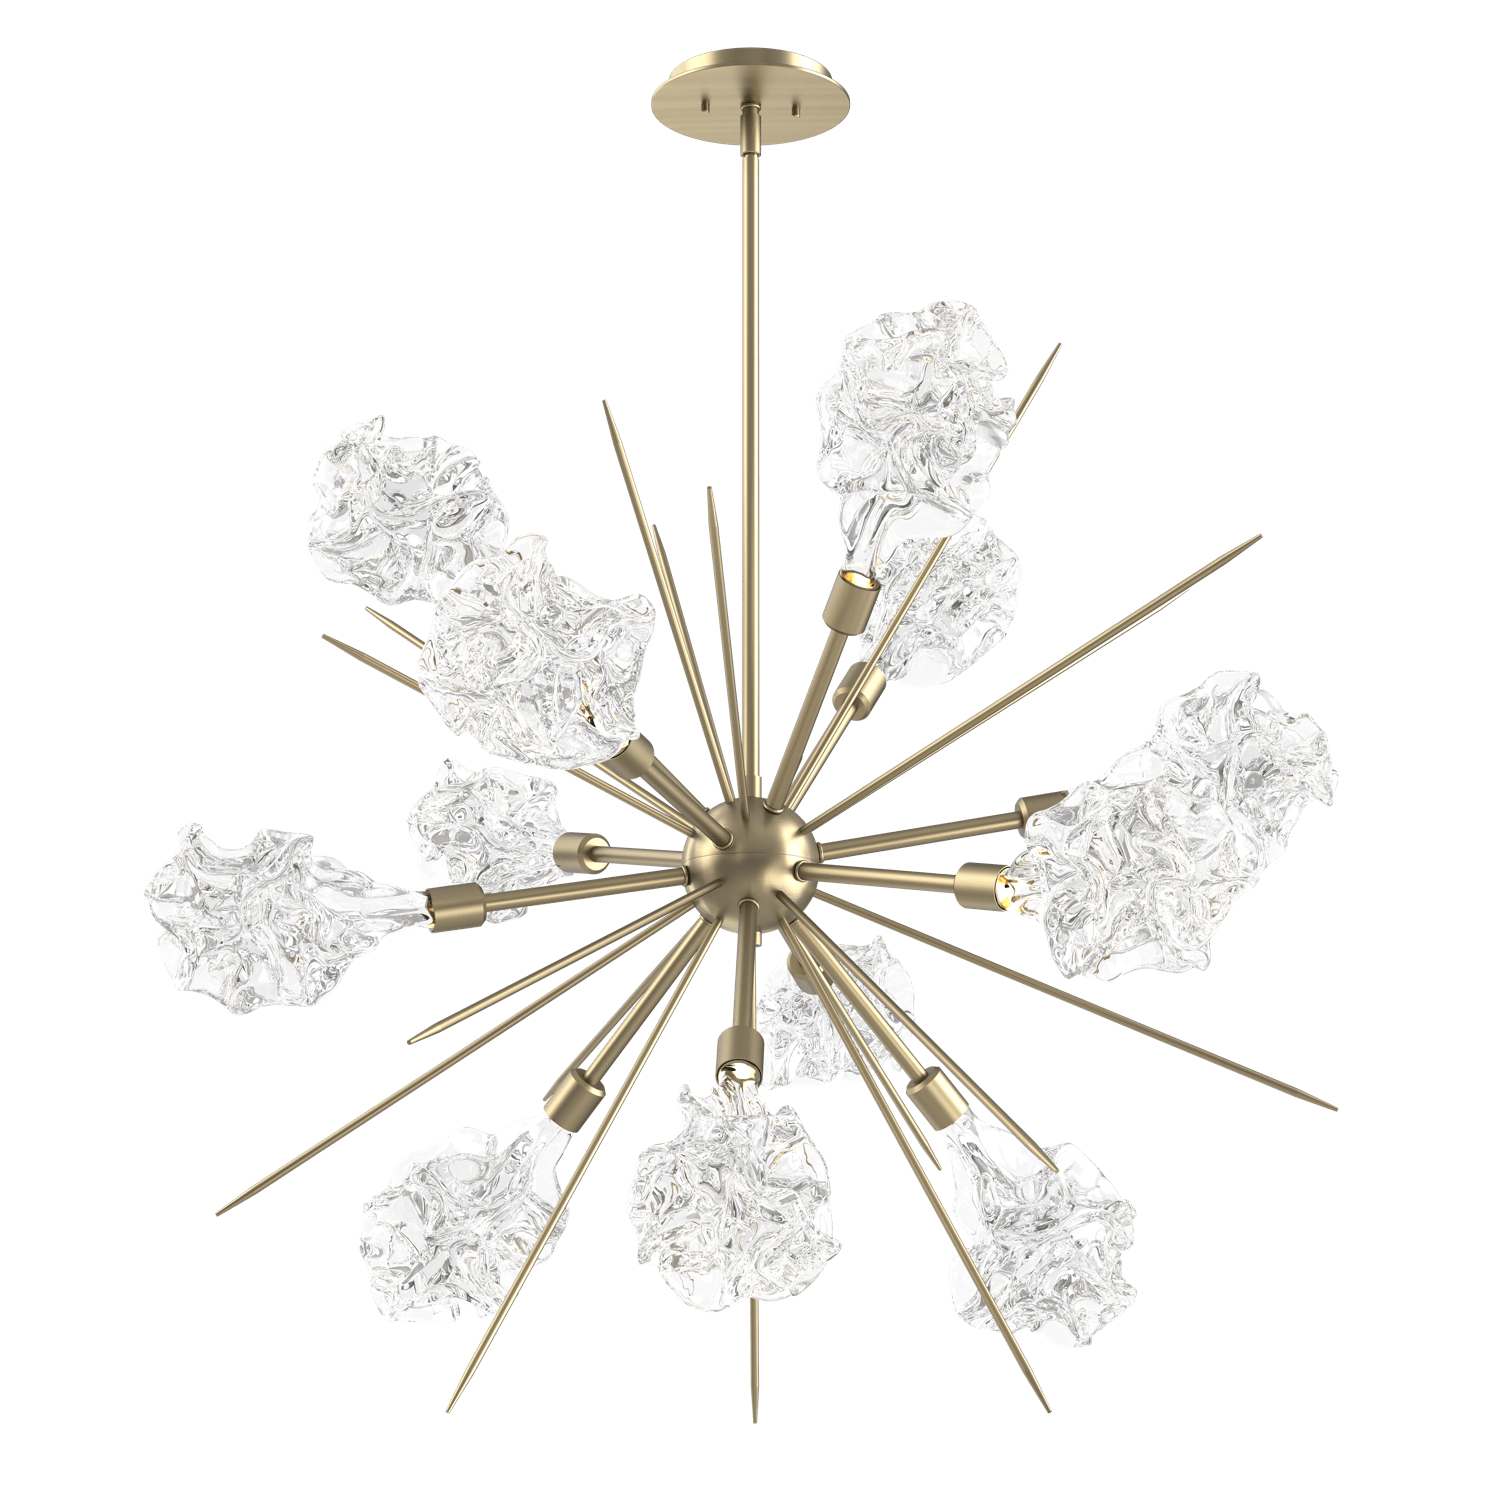 CHB0059-0A-HB-Hammerton-Studio-Blossom-35-inch-starburst-chandelier-with-heritage-brass-finish-and-clear-handblown-crystal-glass-shades-and-LED-lamping